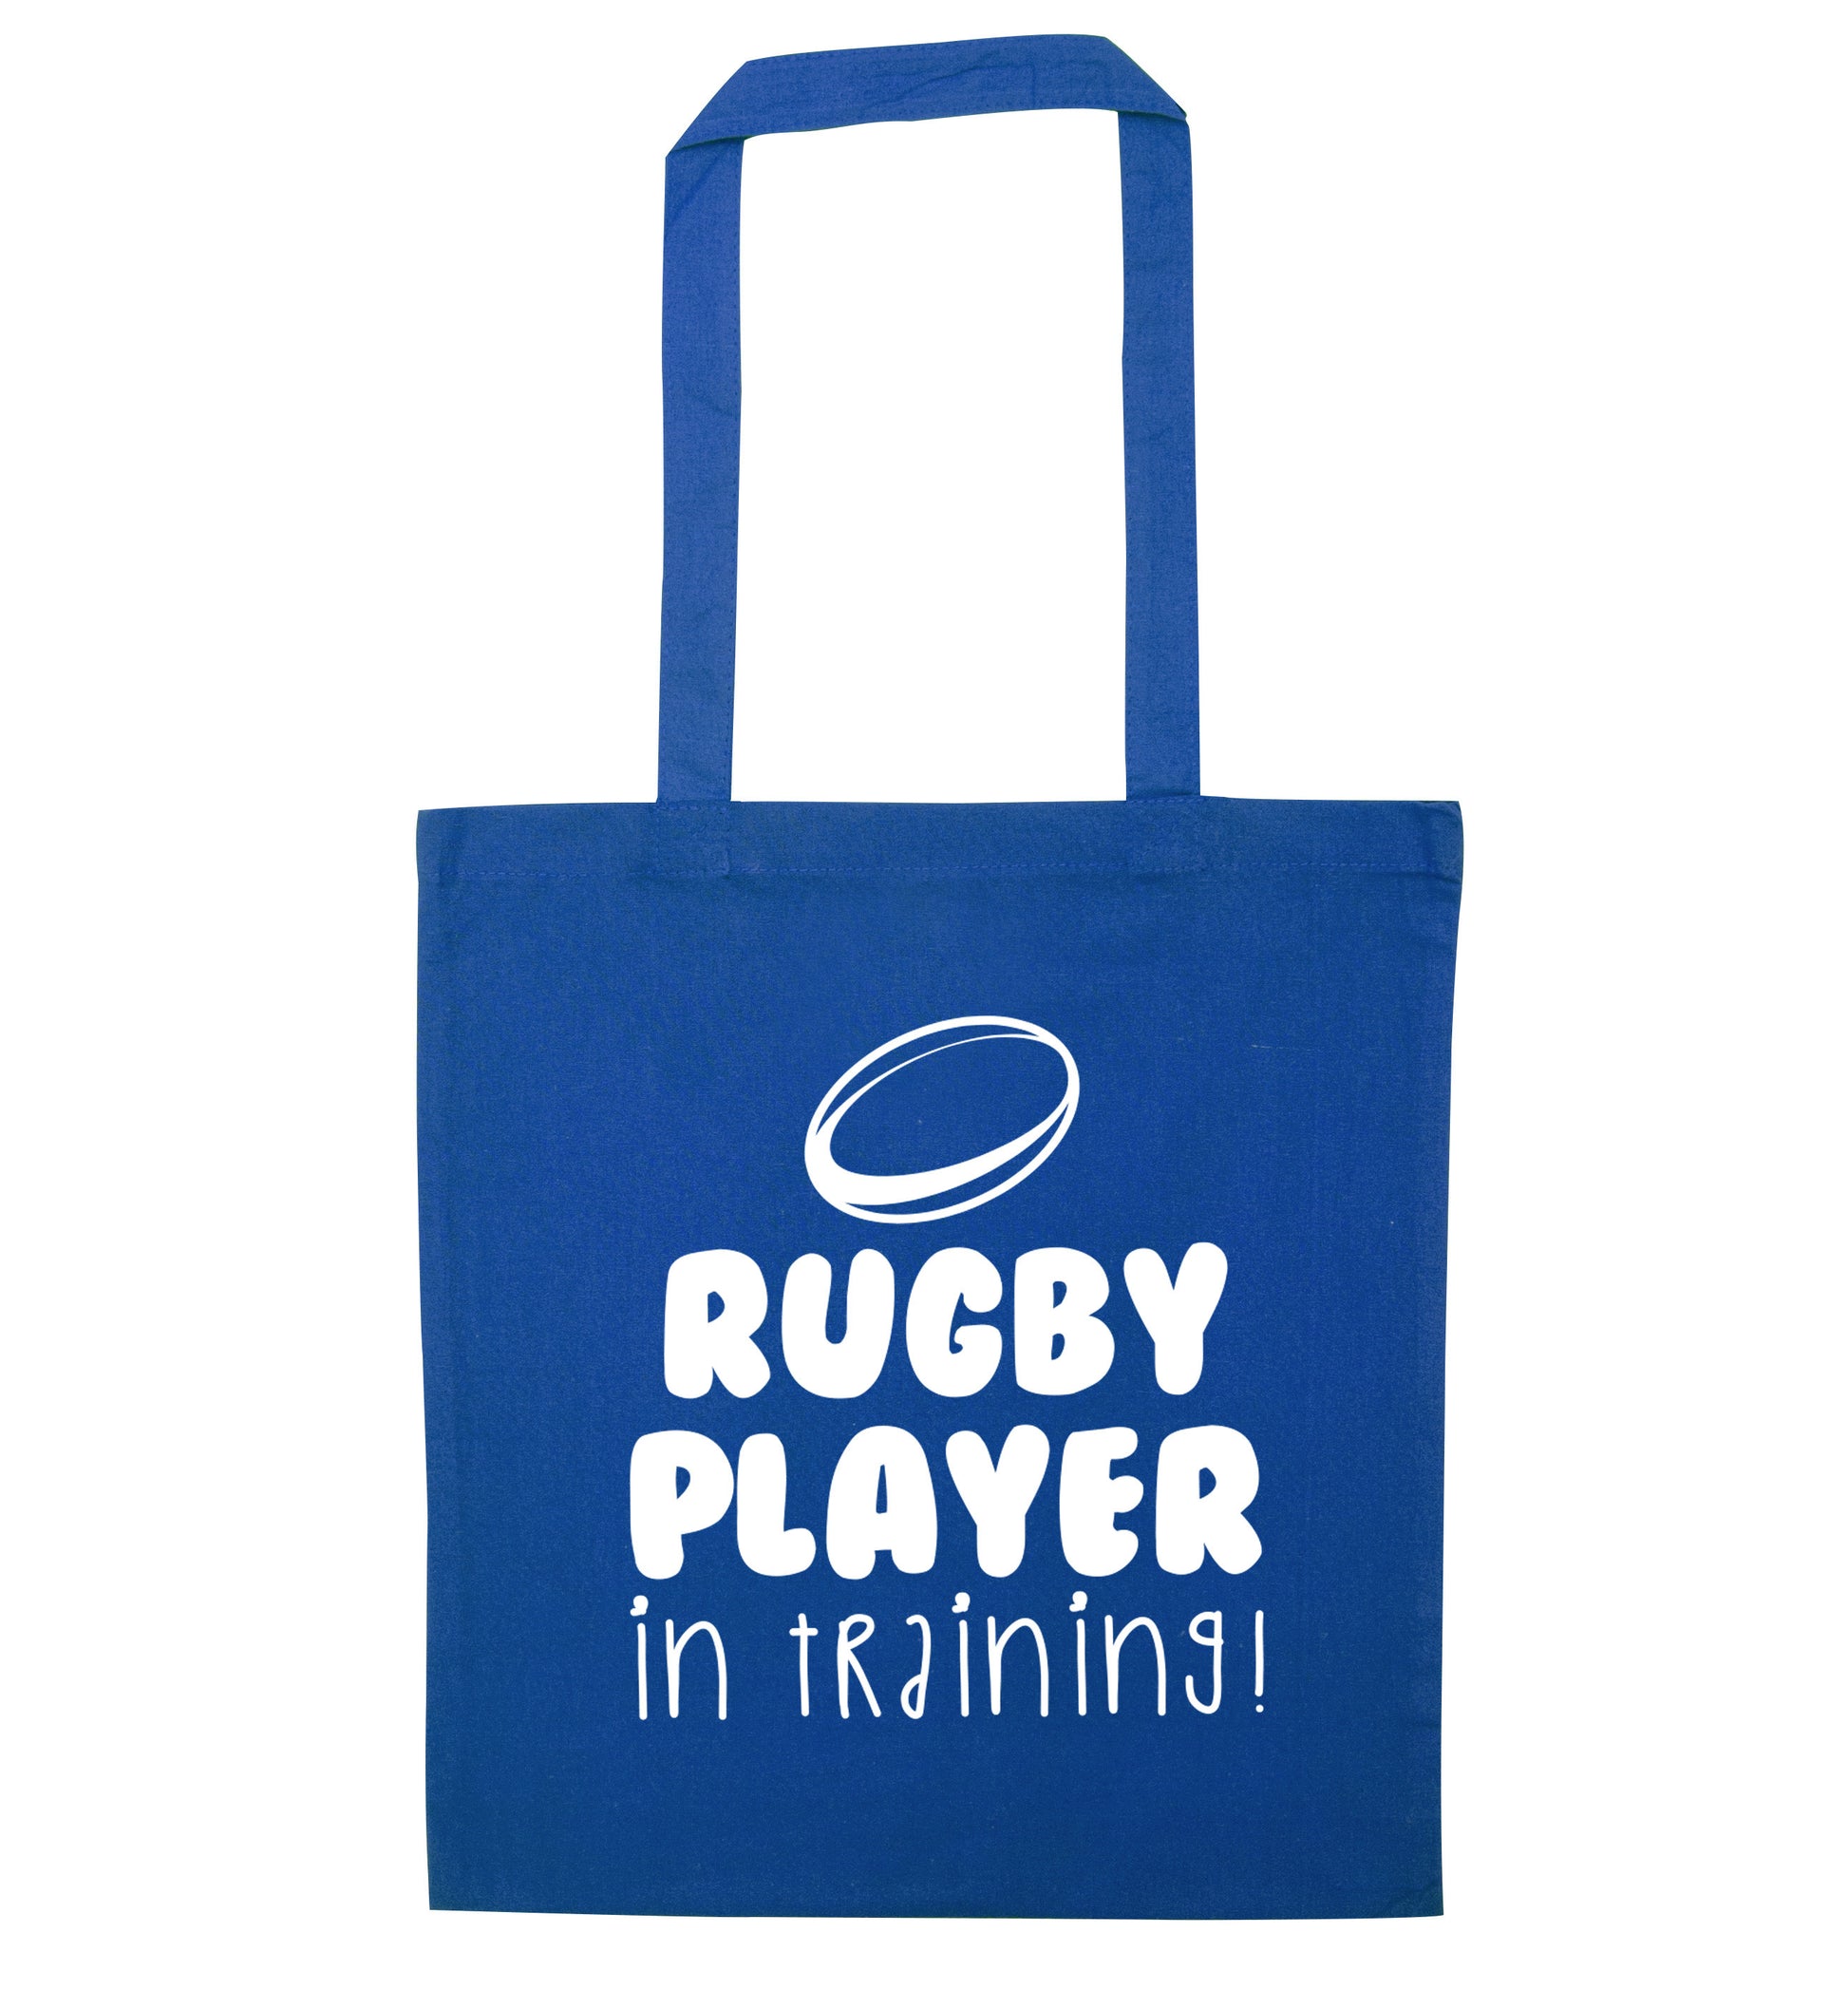 Rugby player in training blue tote bag